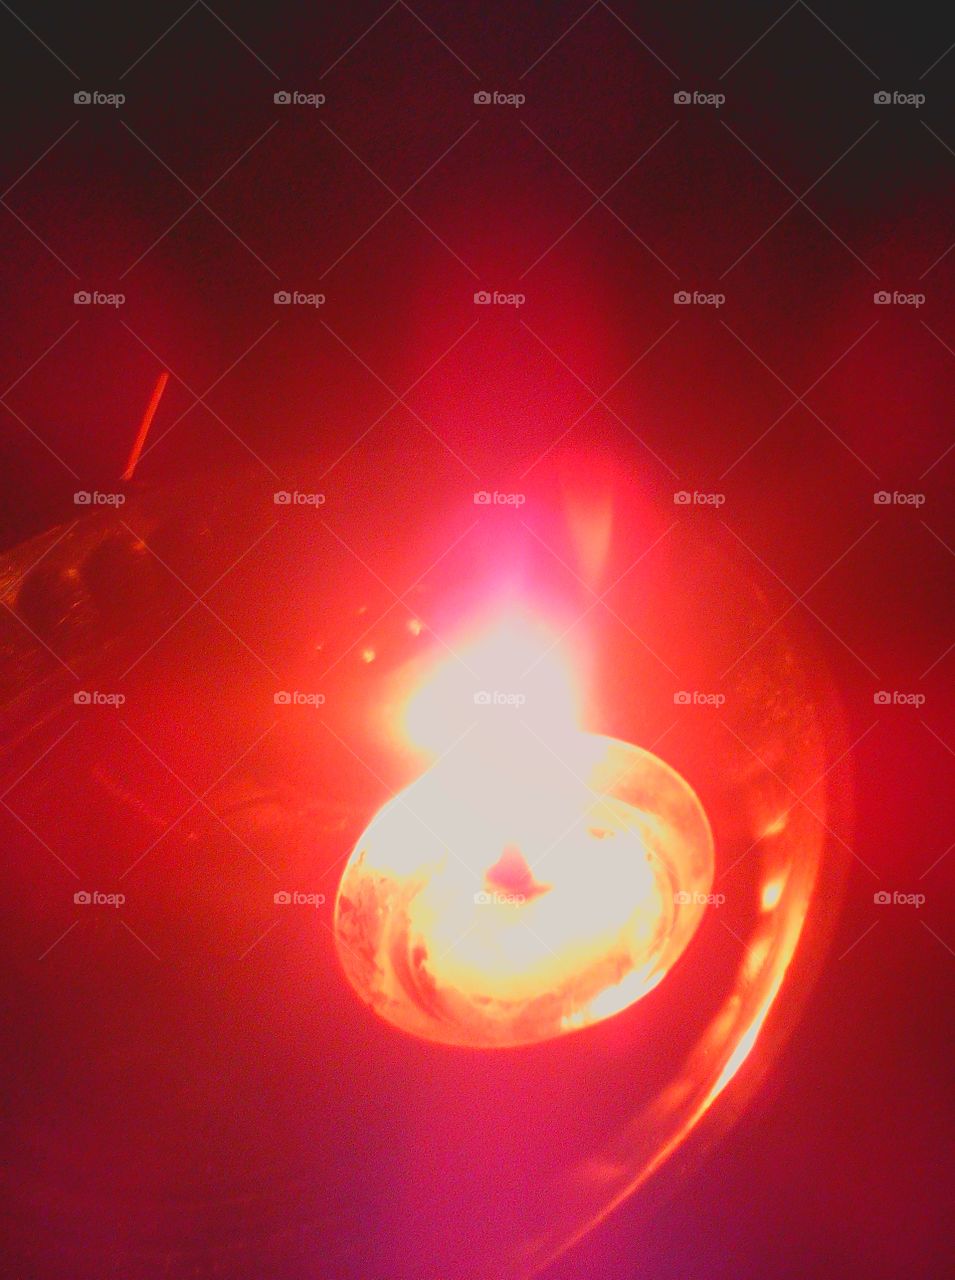 HDR image of a flame with red surrounding effect